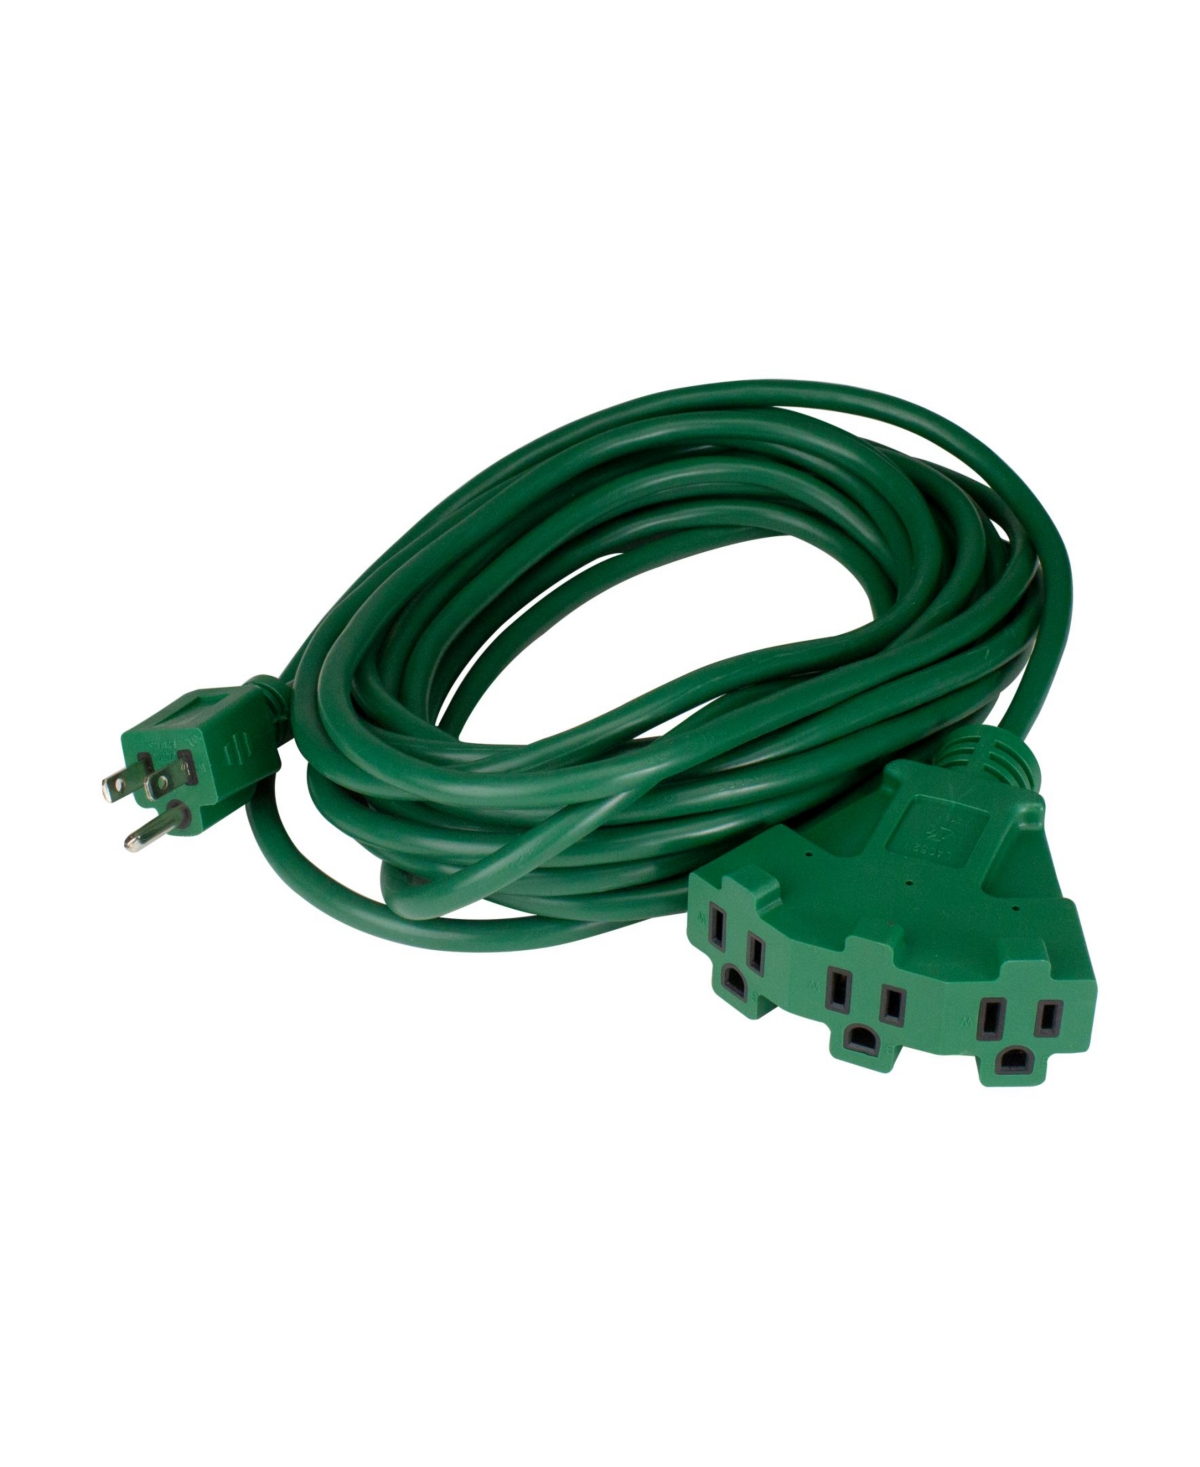 Northlight 25' 3-prong Outdoor Extension Power Cord With Fan Style Connector In Multi-colored